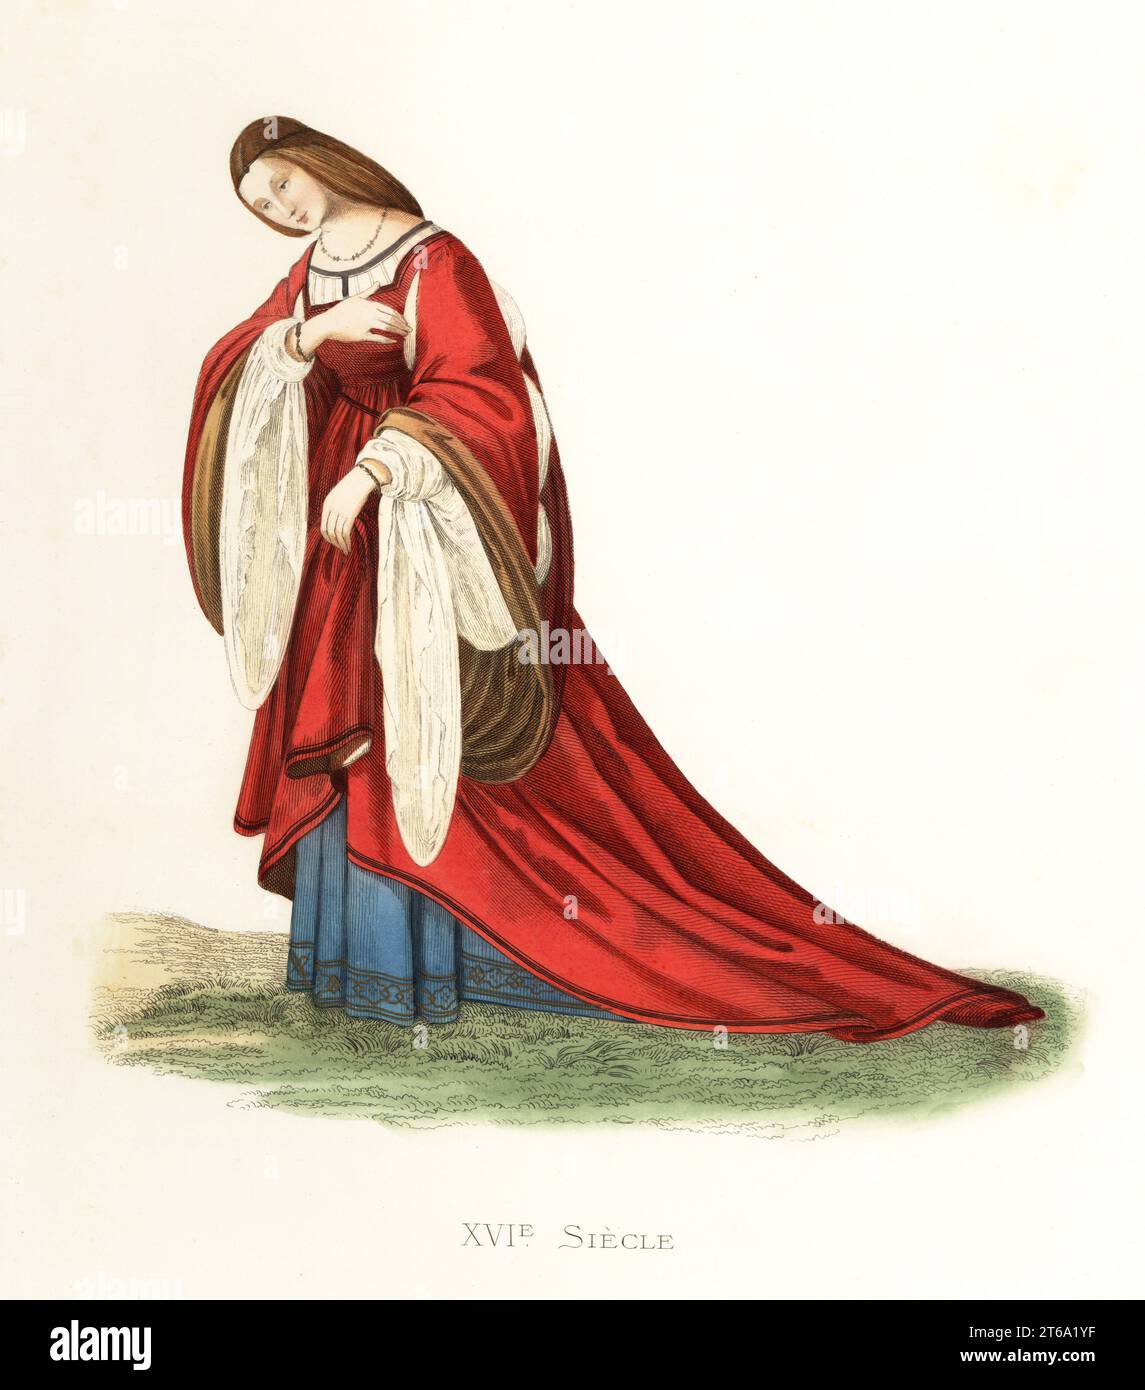 Isabella d'Este (1474-1539), Marchioness of Mantua, cultural and political figure of the Italian Renaissance. In long red robe with wide slashed fur-lined sleeves. Isabelle d'Este, Comtesse de Mantoue. After a painting by Lorenzo Costa. Handcolored lithograph after an illustration by Edmond Lechevallier-Chevignard from Georges Duplessis's Costumes historiques des XVIe, XVIIe et XVIIIe siecles (Historical costumes of the 16th, 17th and 18th centuries), Paris, 1867. Edmond Lechevallier-Chevignard was an artist, book illustrator, and interior designer. Stock Photo